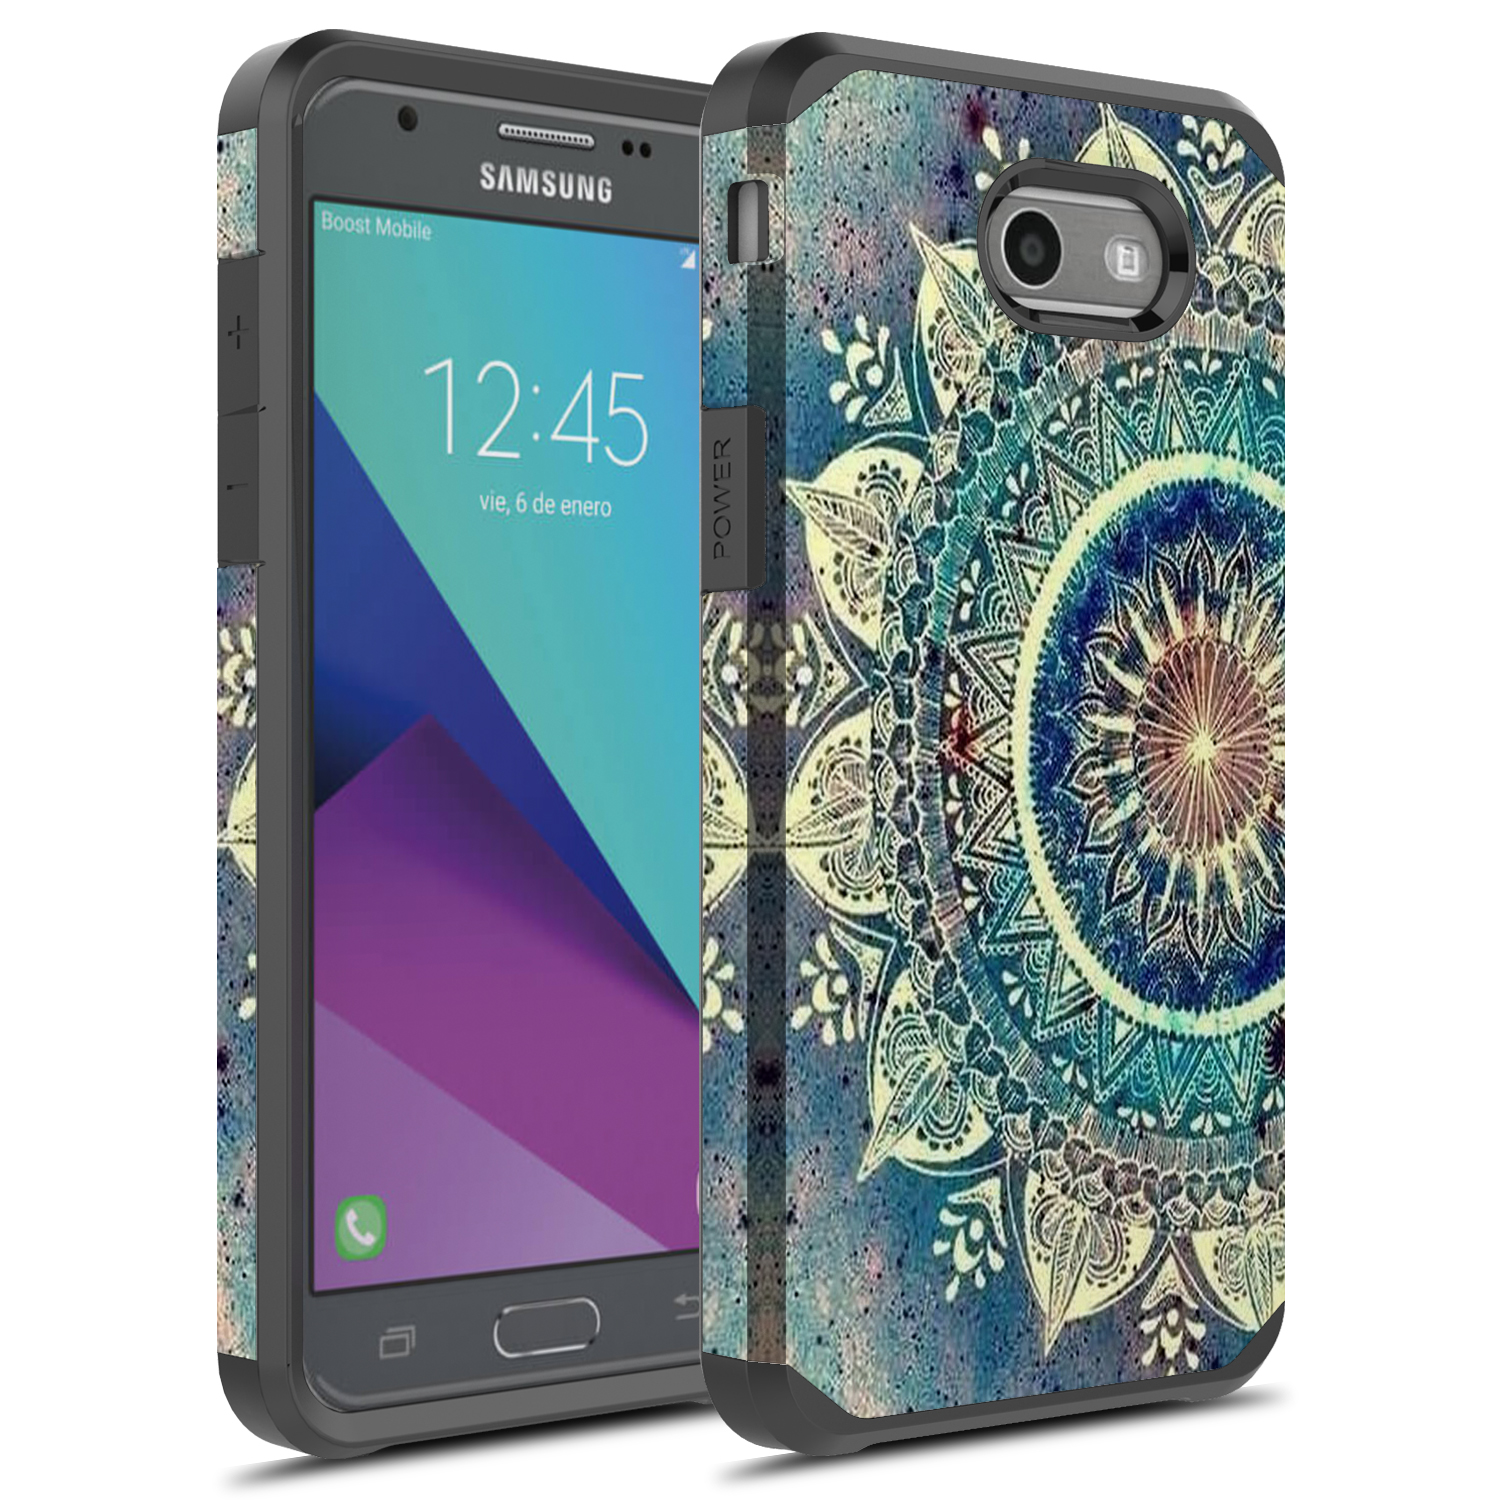 Samsung Galaxy J7 V Case, Galaxy J7 Prime Case, Galaxy J7 Sky Pro Case, Galaxy J7 Perx Case, Galaxy Halo Case, Rosebono Hybird Shockproof Graphic Case for SM-J727 (Green Marble) - image 1 of 5